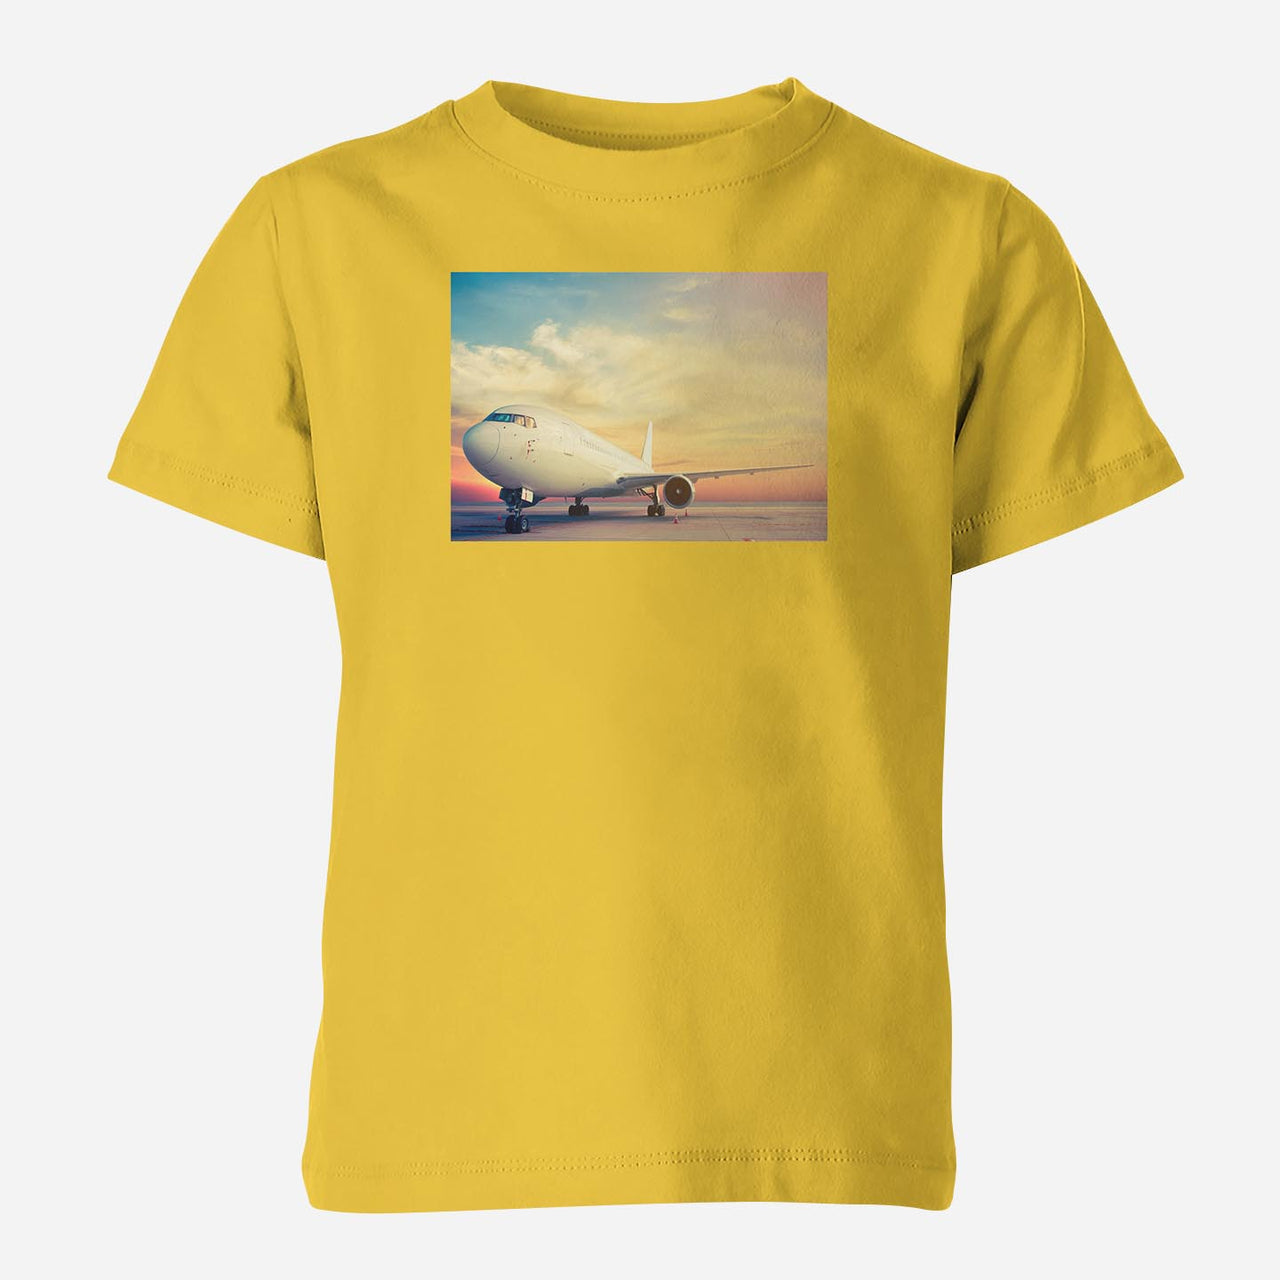 Parked Aircraft During Sunset Designed Children T-Shirts